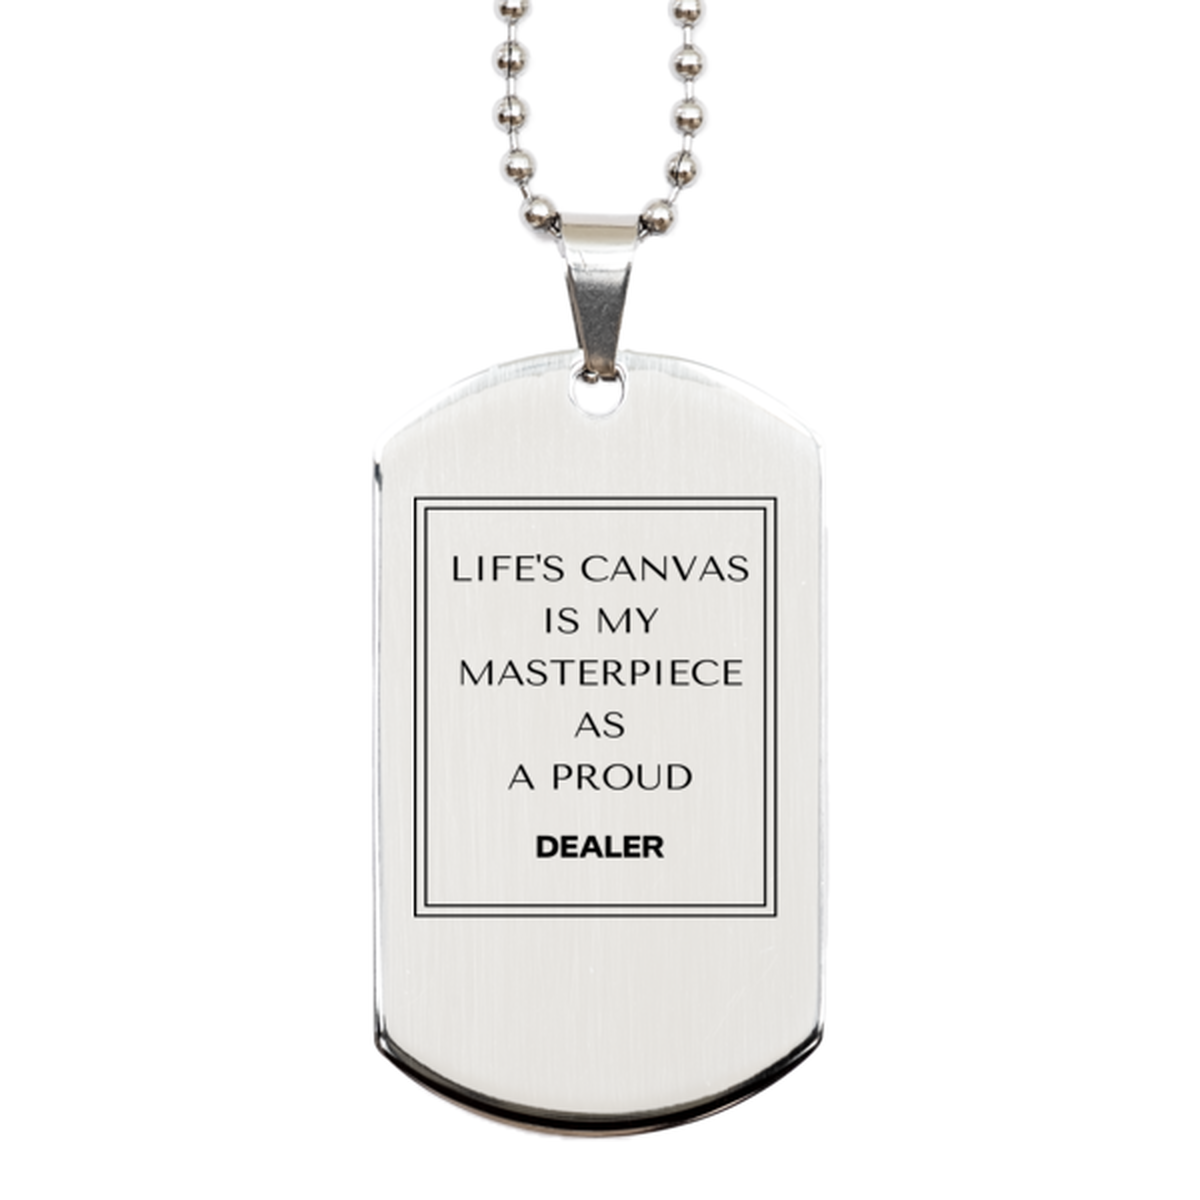 Proud Dealer Gifts, Life's canvas is my masterpiece, Epic Birthday Christmas Unique Silver Dog Tag For Dealer, Coworkers, Men, Women, Friends